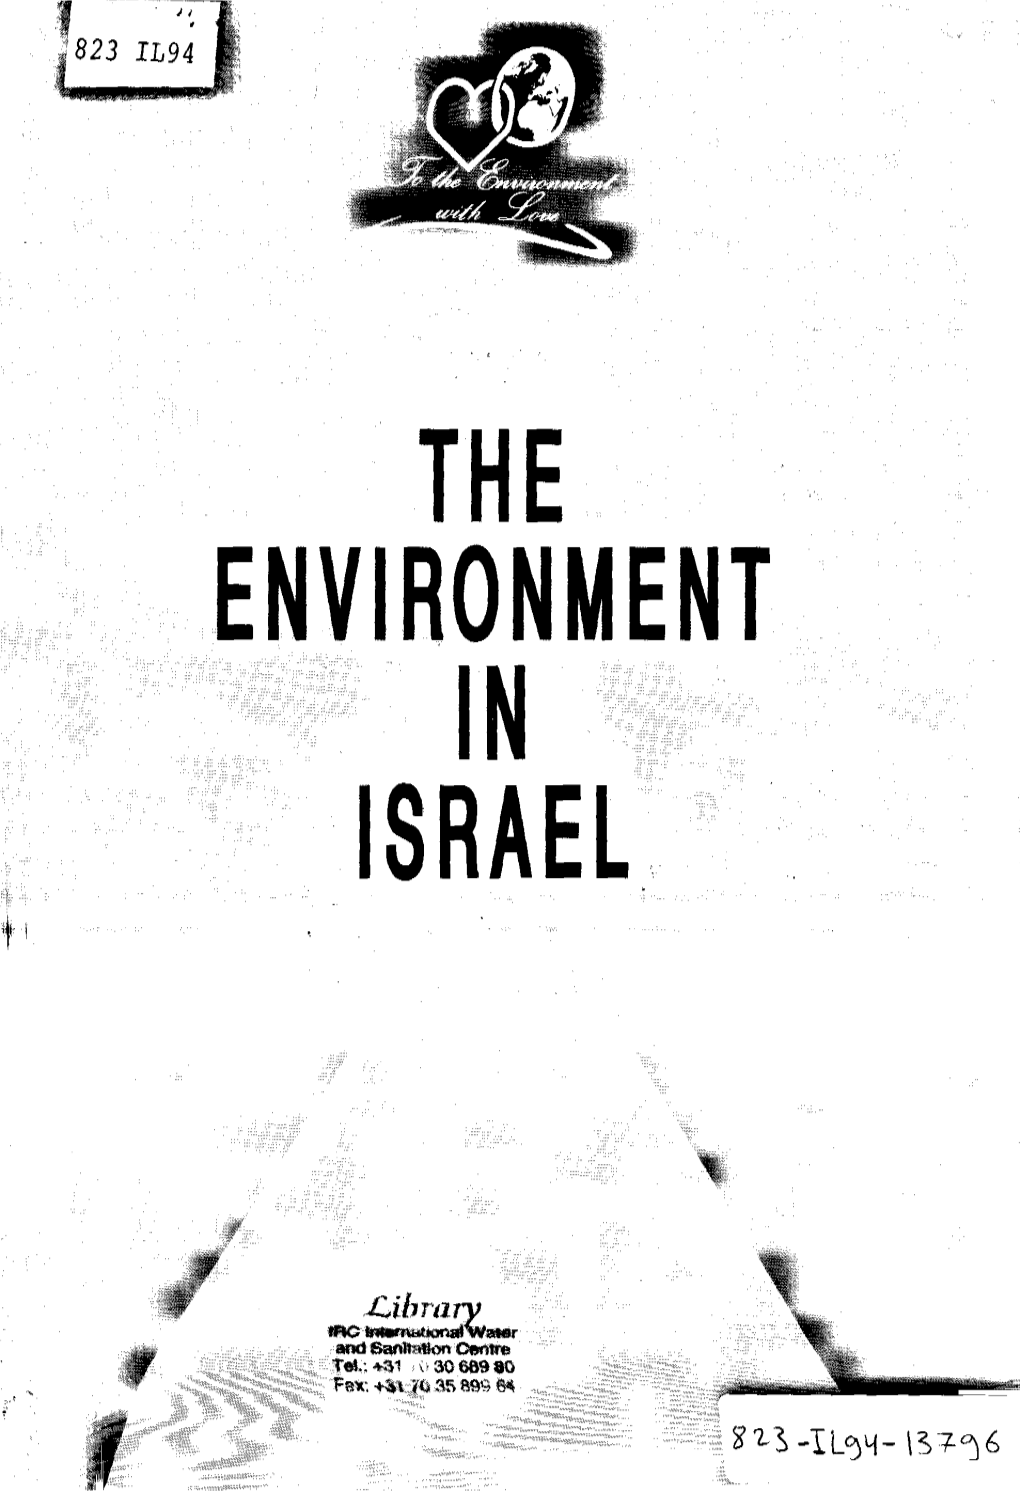 The Environment in Israel